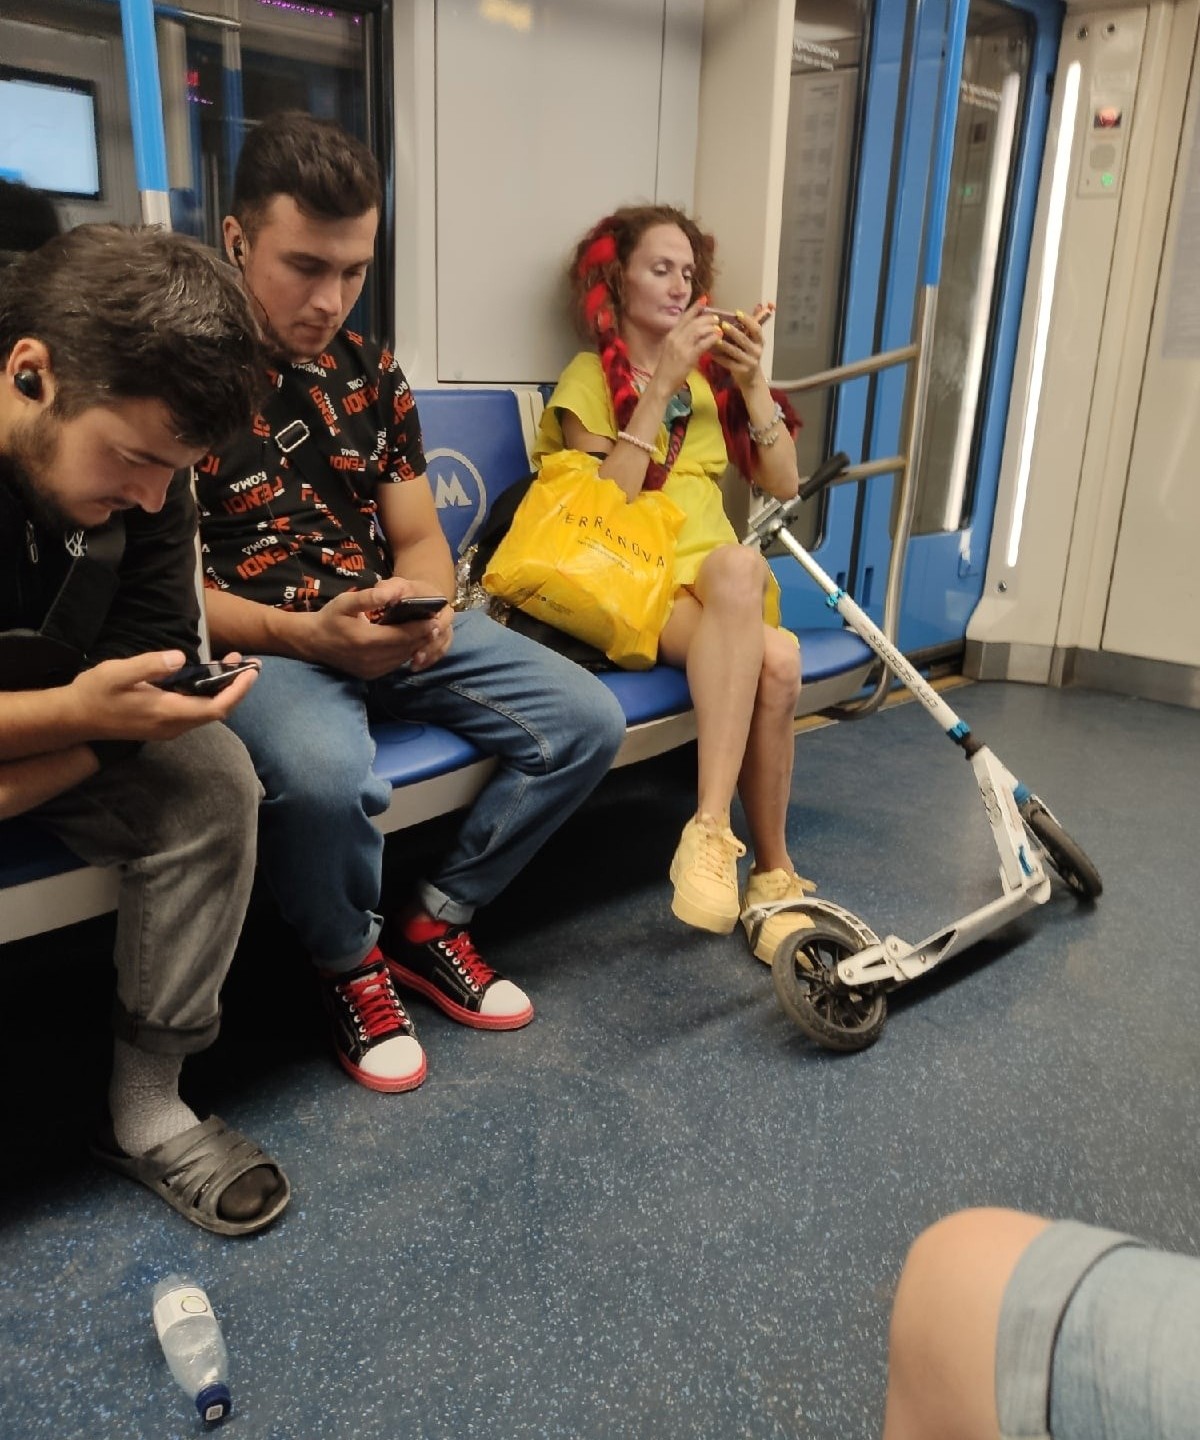 Strange People In The Subway, part 17